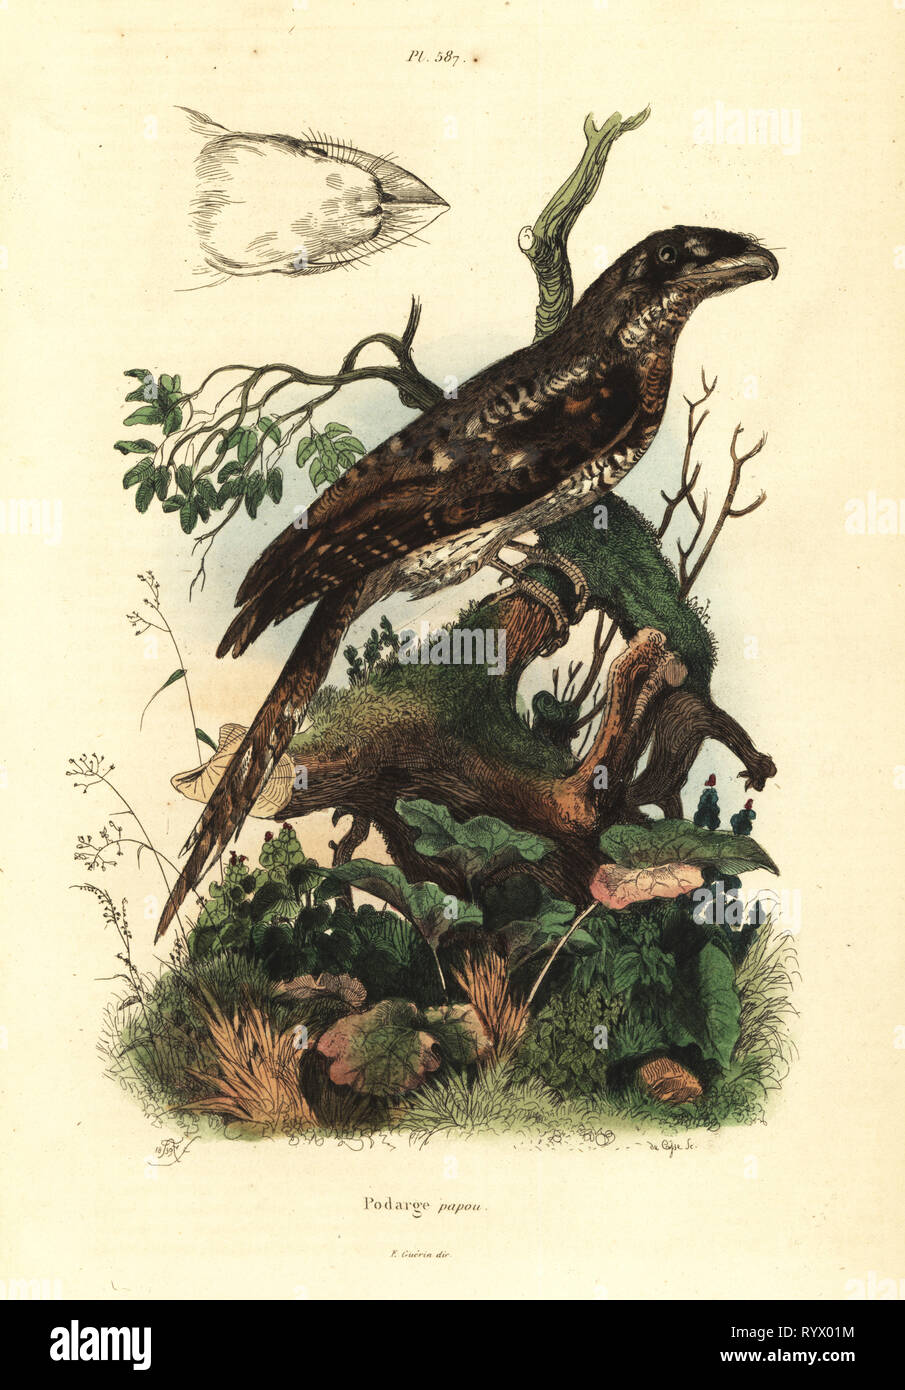 Papuan frogmouth, Podargus papuensis Podarge papou. Handcoloured steel engraving by du Casse after an illustration by Adolph Fries from Felix-Edouard Guerin-Meneville's Dictionnaire Pittoresque d'Histoire Naturelle (Picturesque Dictionary of Natural History), Paris, 1834-39. Stock Photo